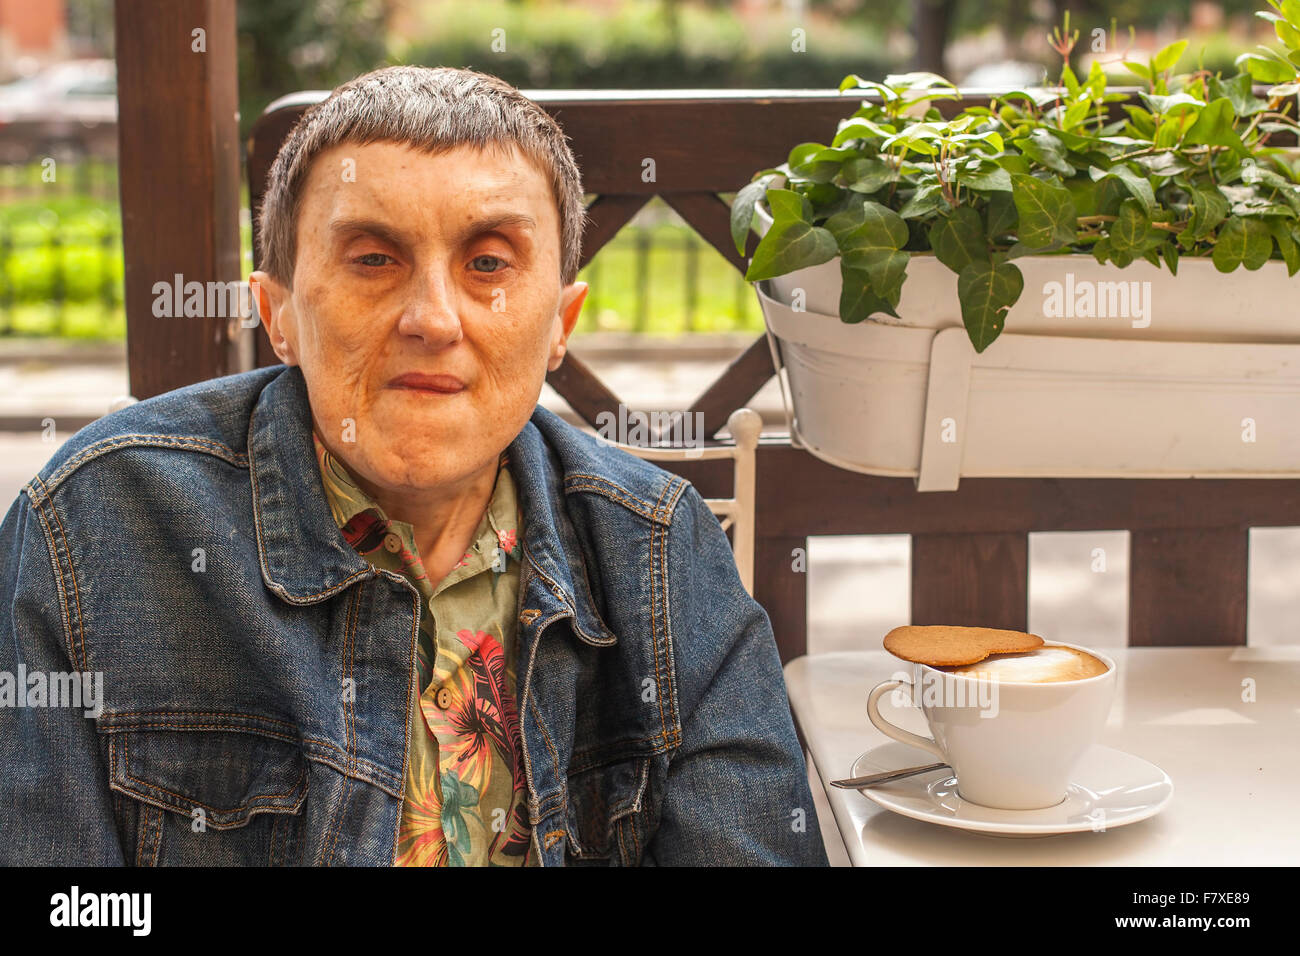 Disabled man with cerebral palsy closeup portrait in outdoor cafe. Stock Photo